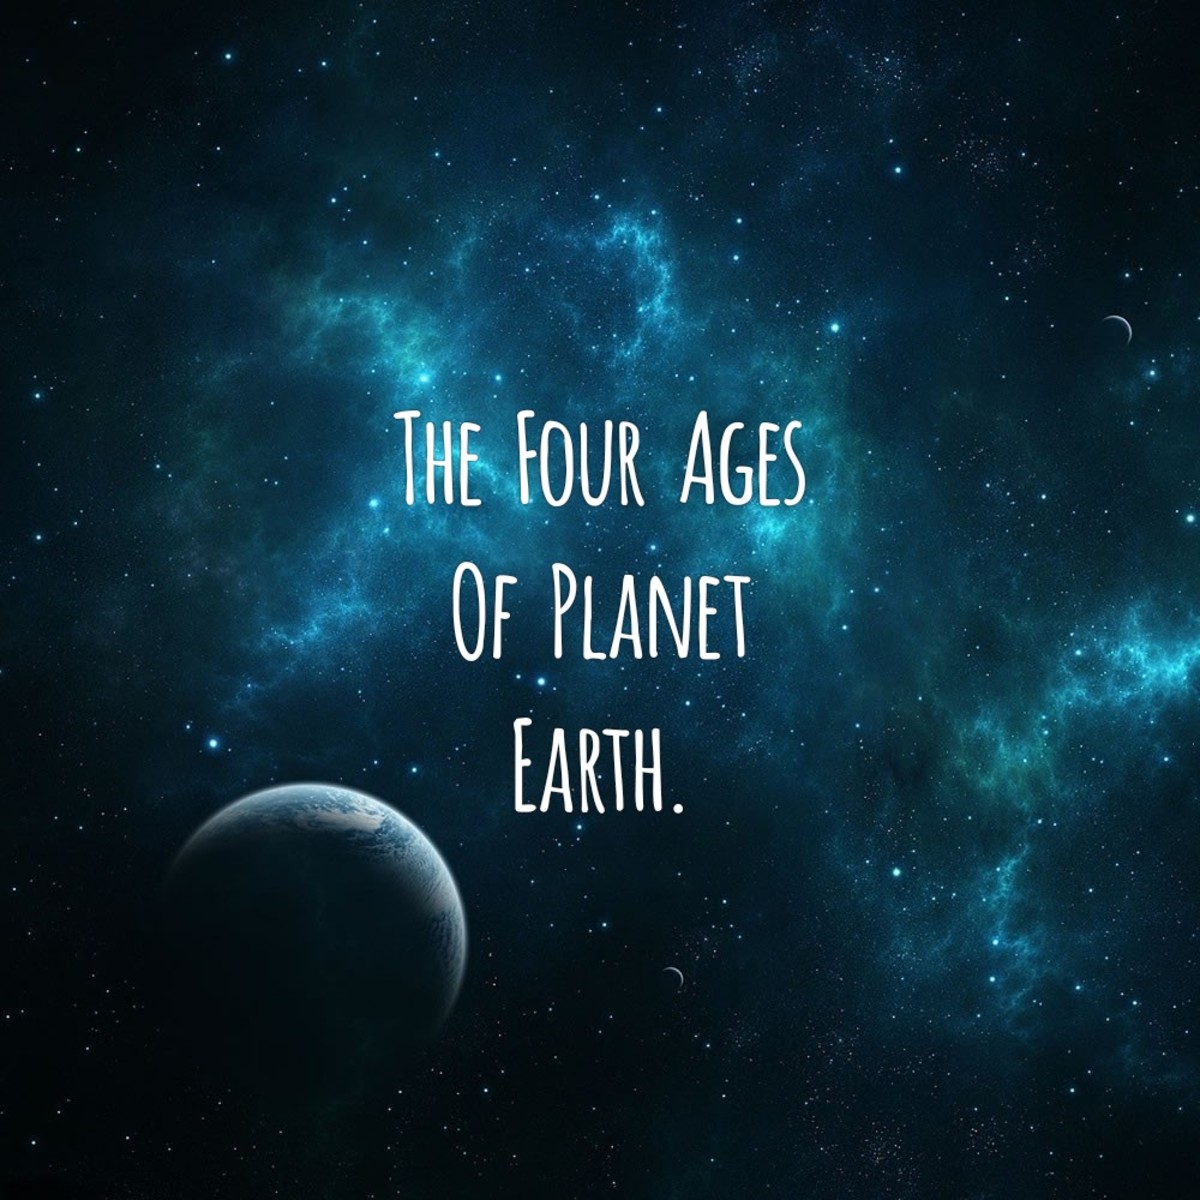 The Four Ages of Planet Earth.